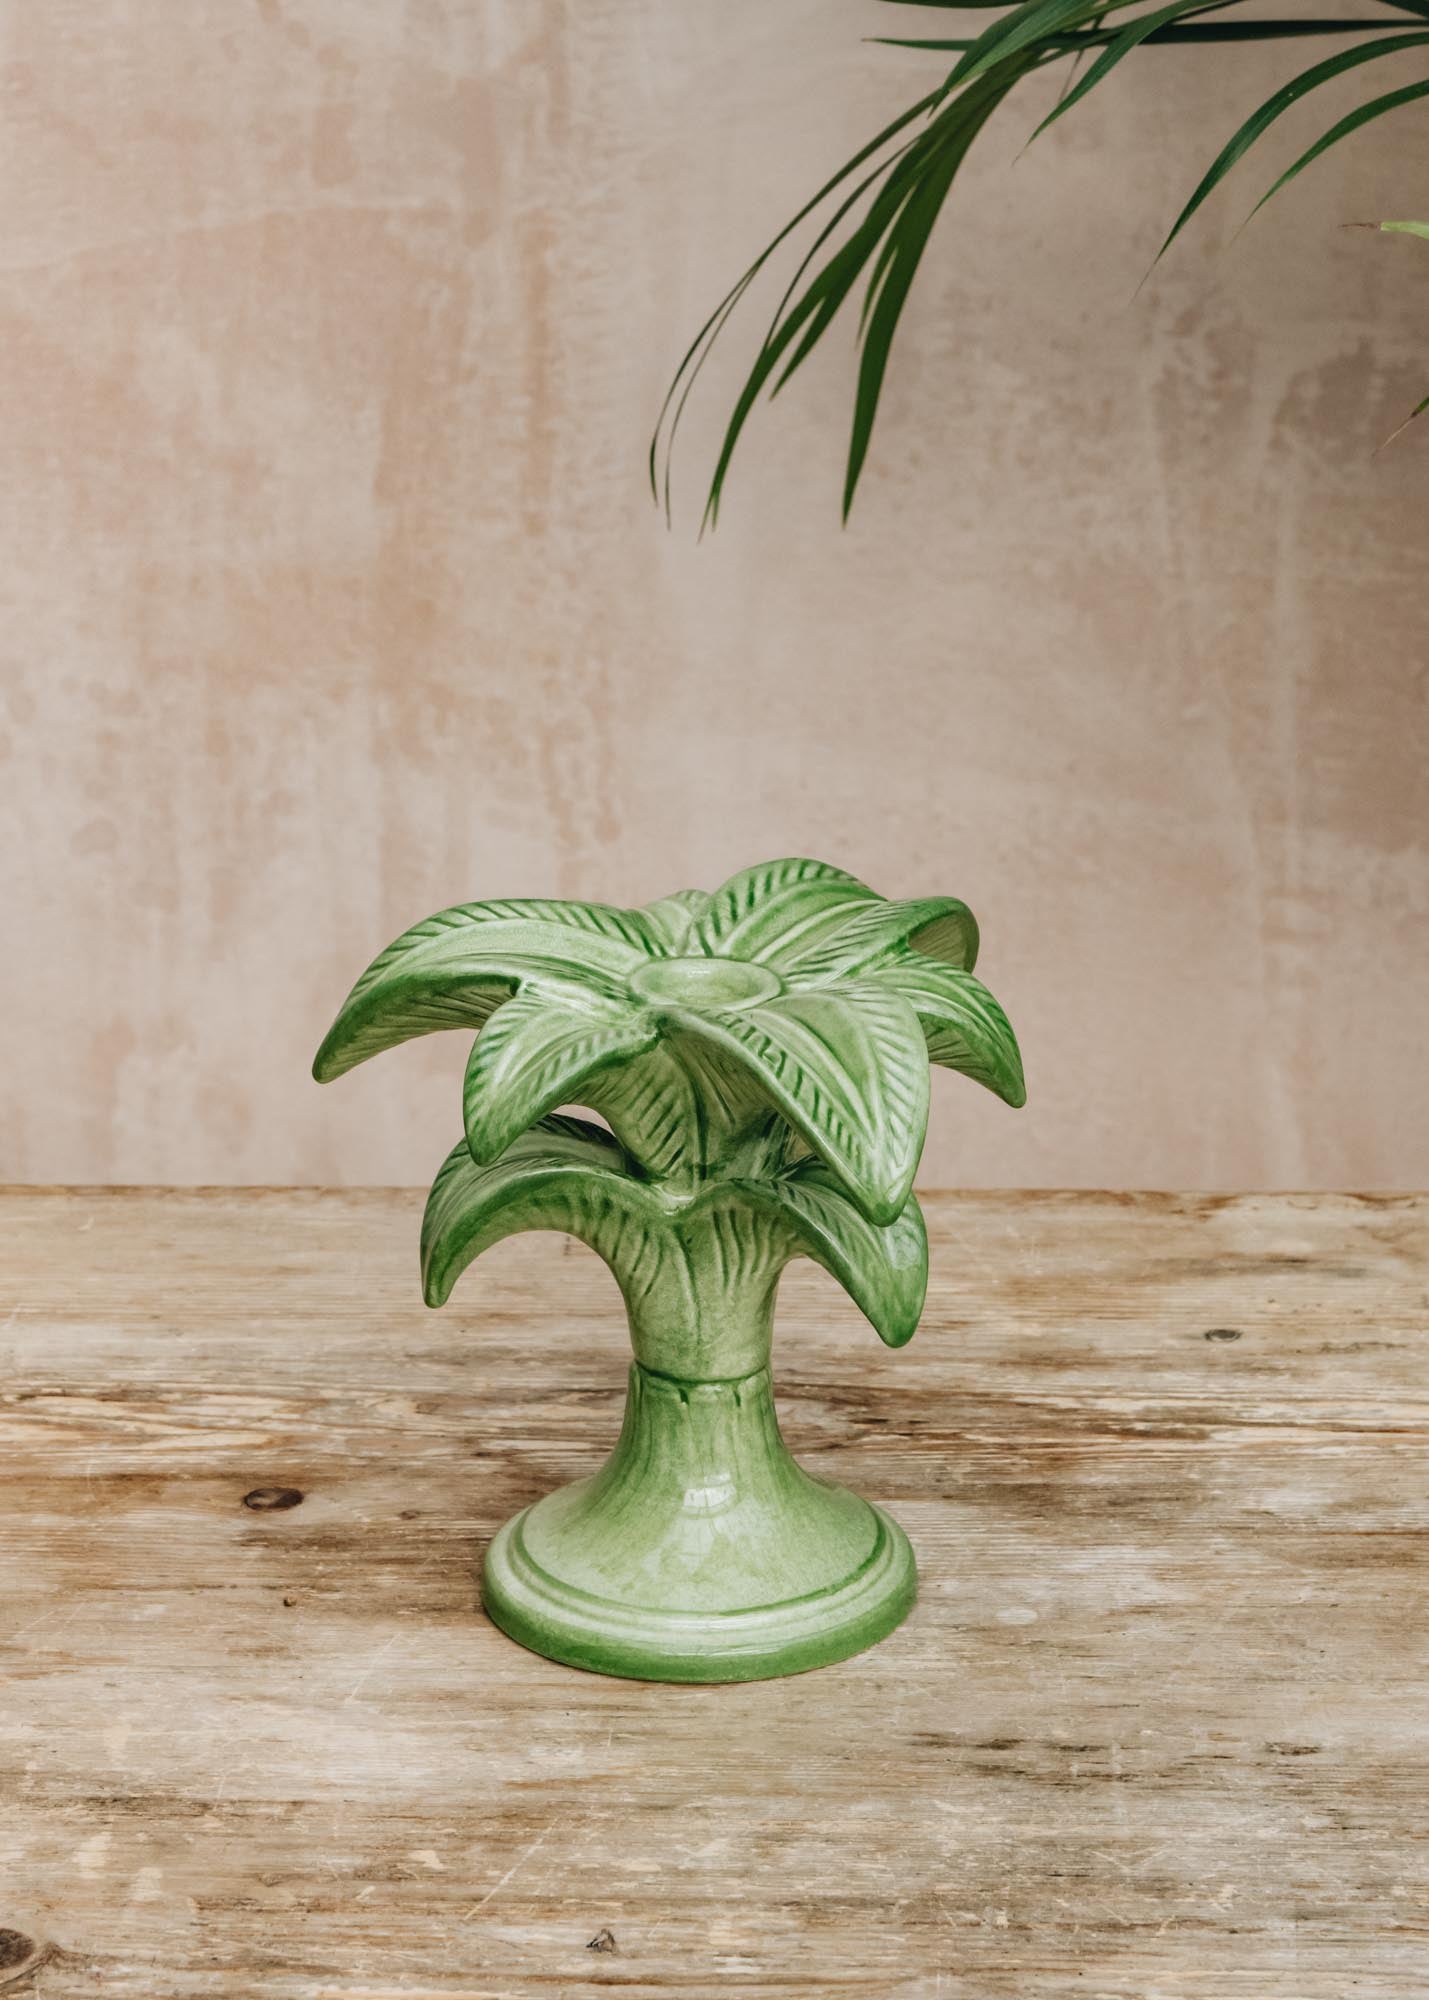 Les Ottomans Small Palm Green Ceramic Candleholder